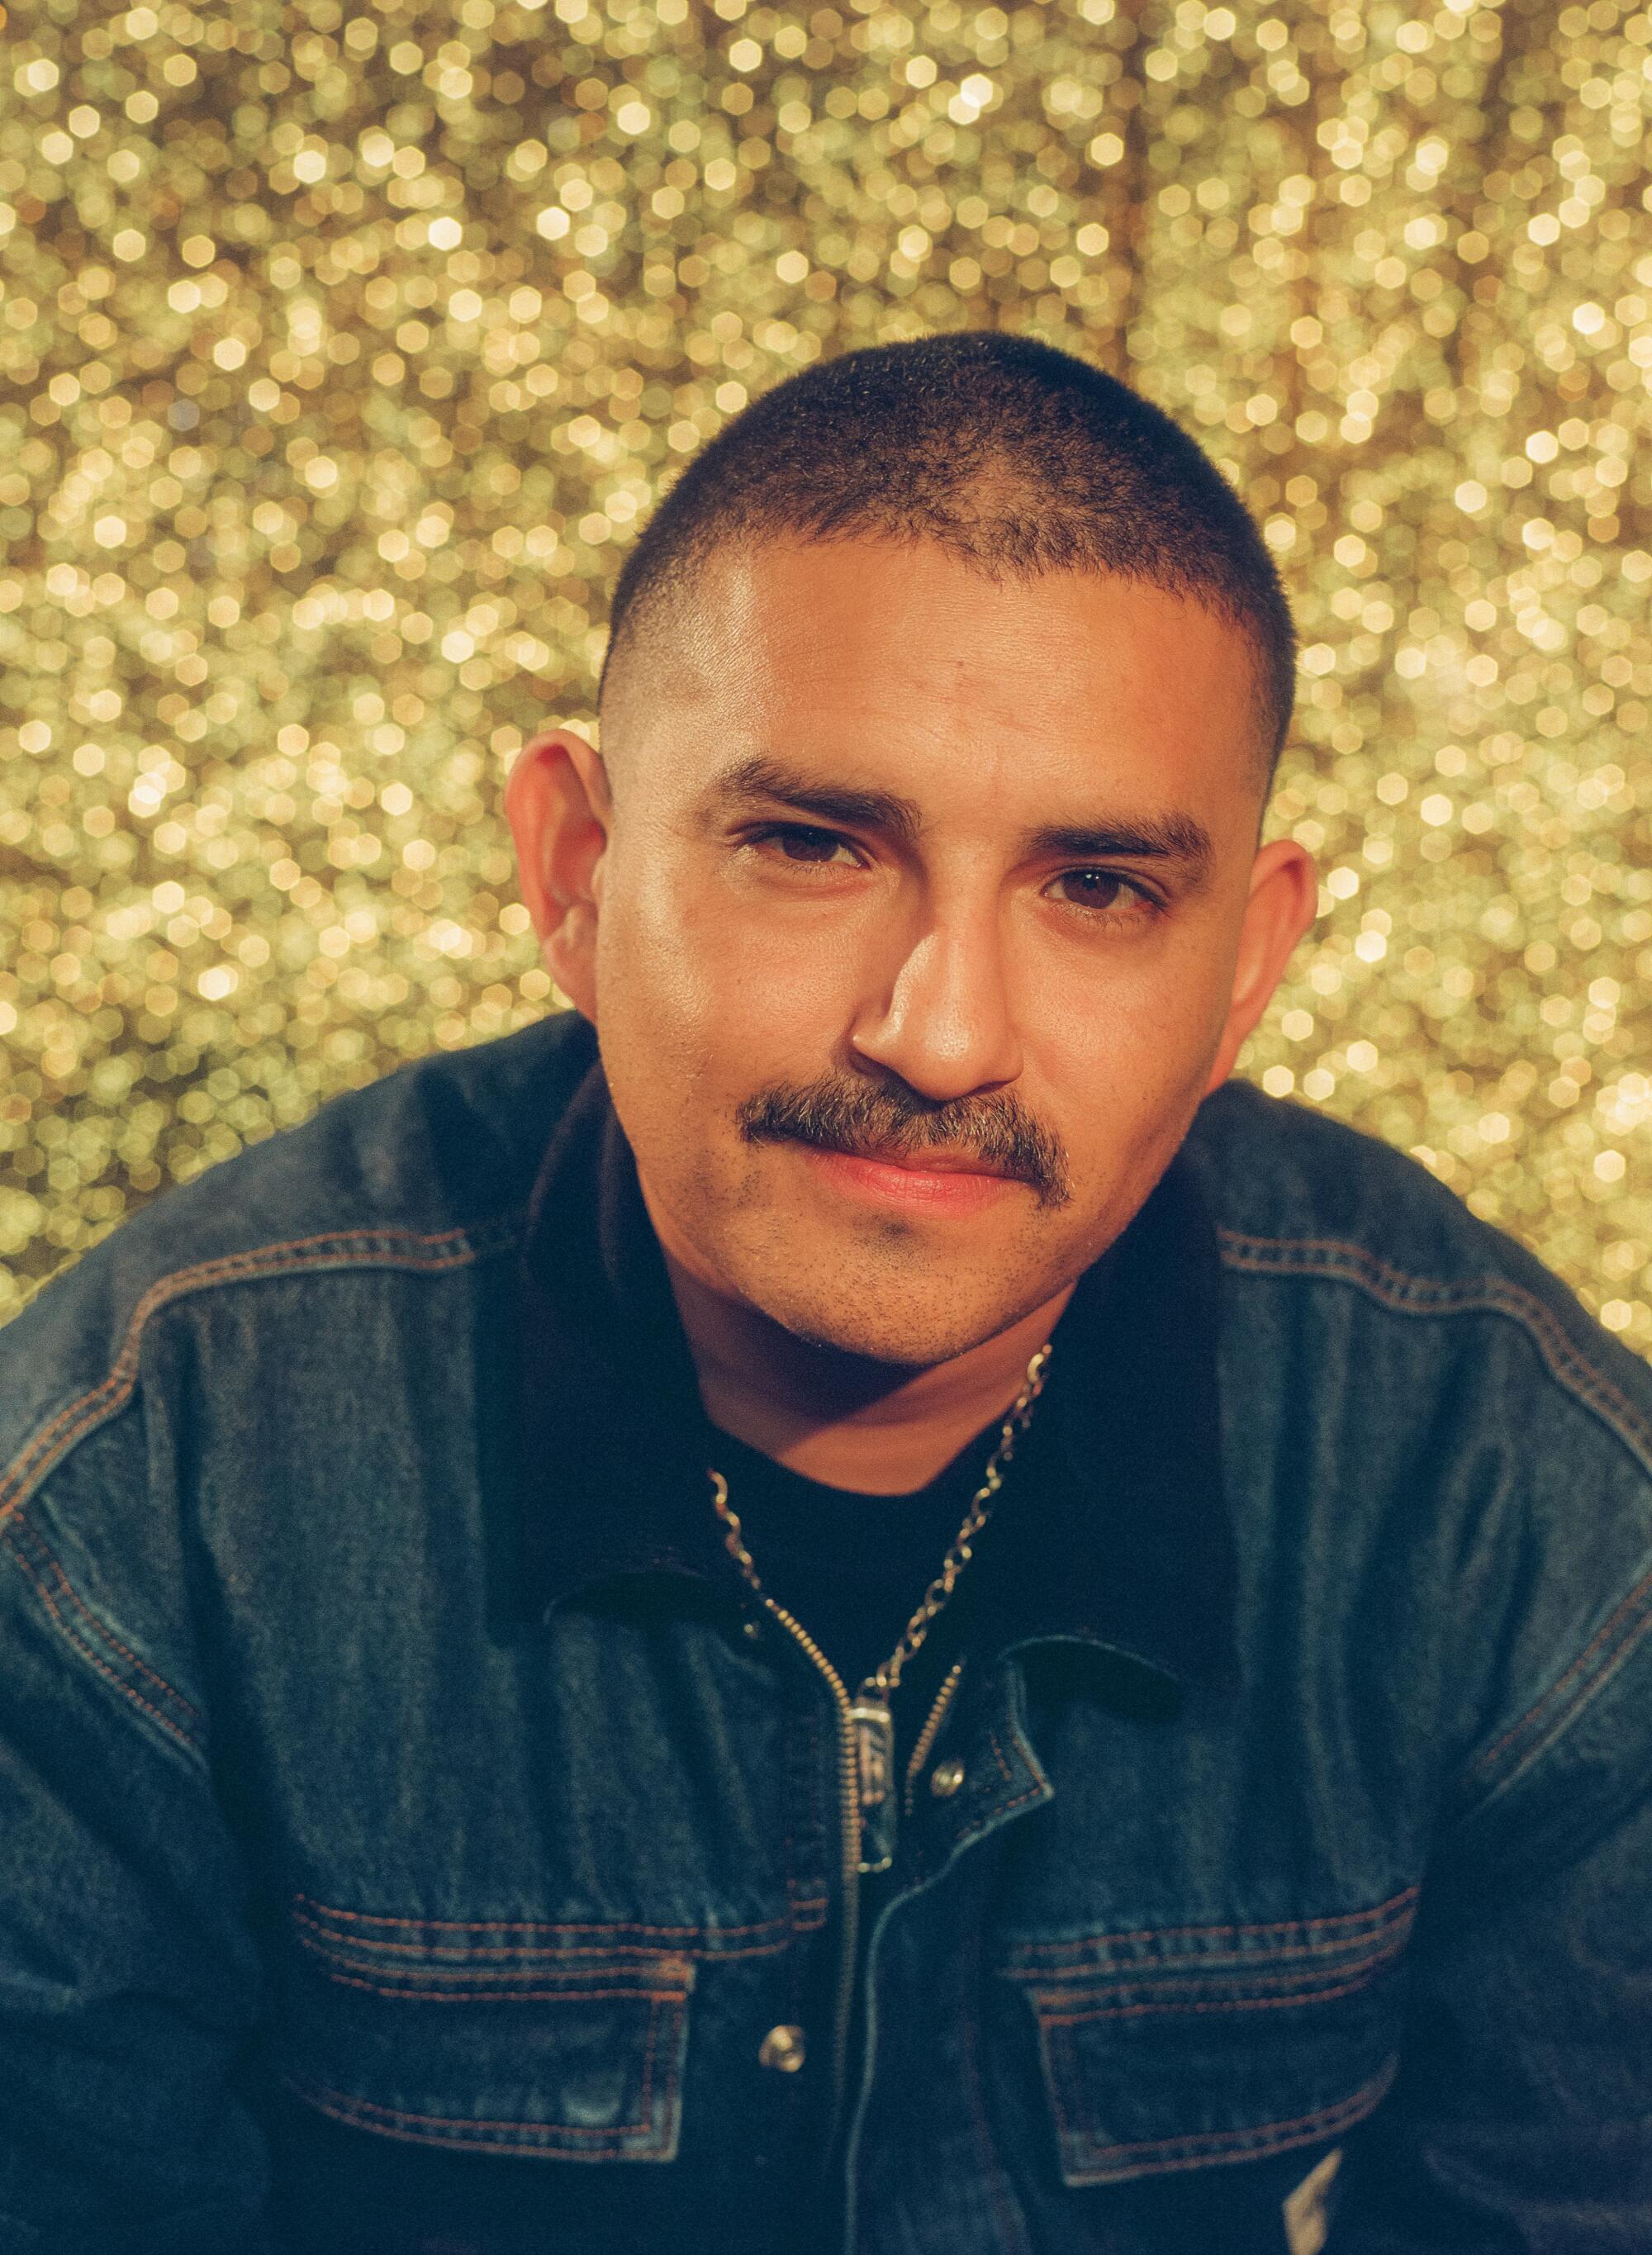 A man in a denim jacket poses in front of a gold glittery background.